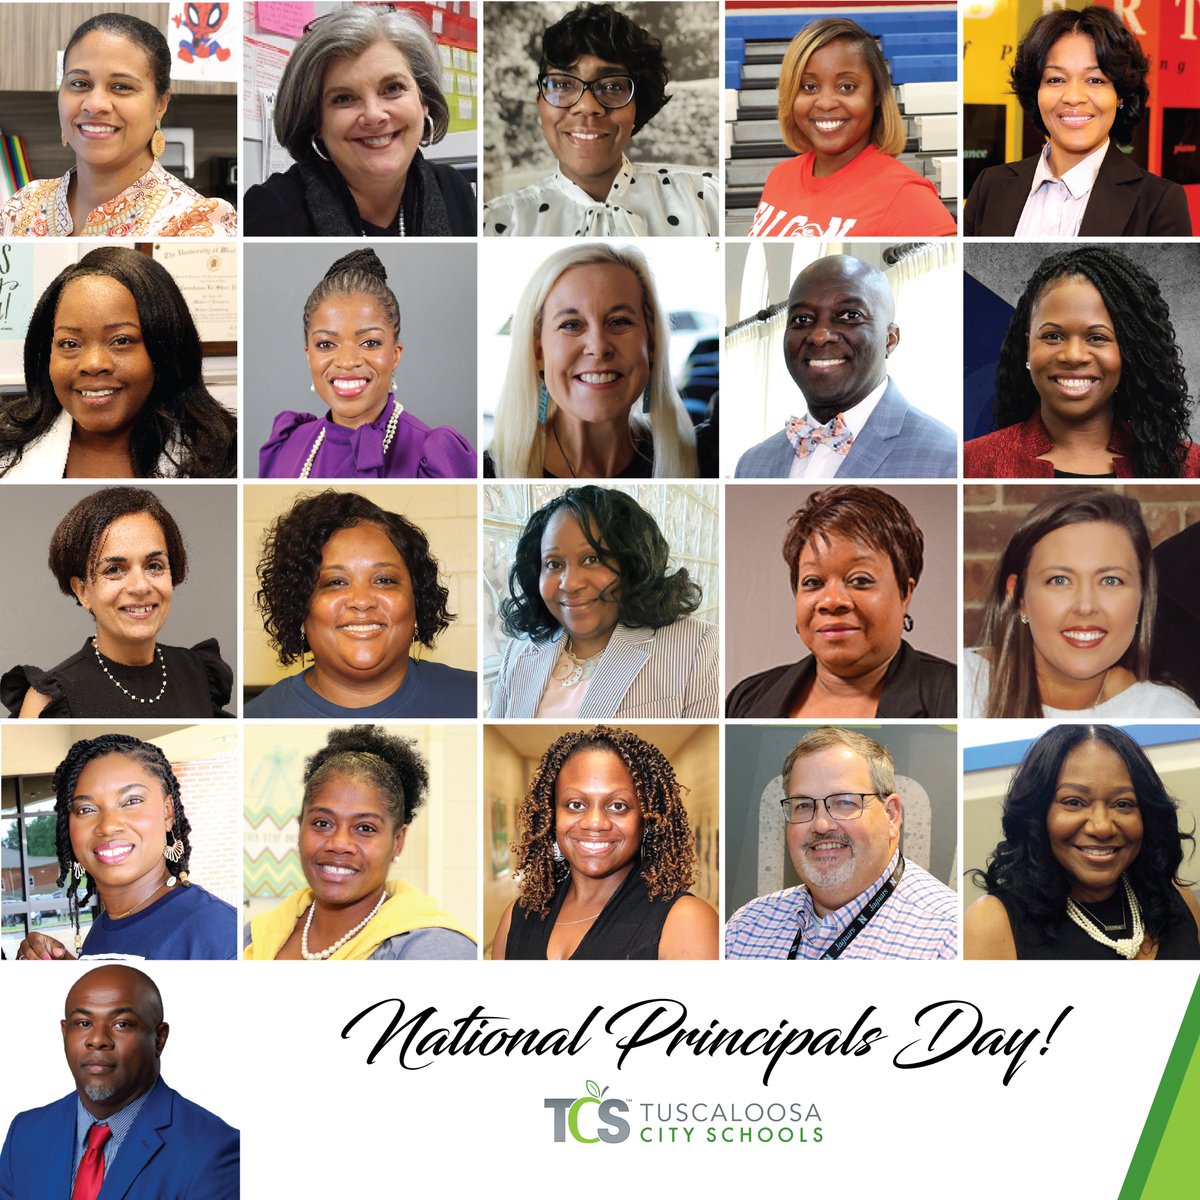 Today, May 1, 2024, is National Principals Day! And today we recognize the importance of our principals! Without them, a school would not operate on a daily basis. Thank you for your leadership & dedication to your school communities!! #AmazingtotheCORE #SchoolPrincipalsDay